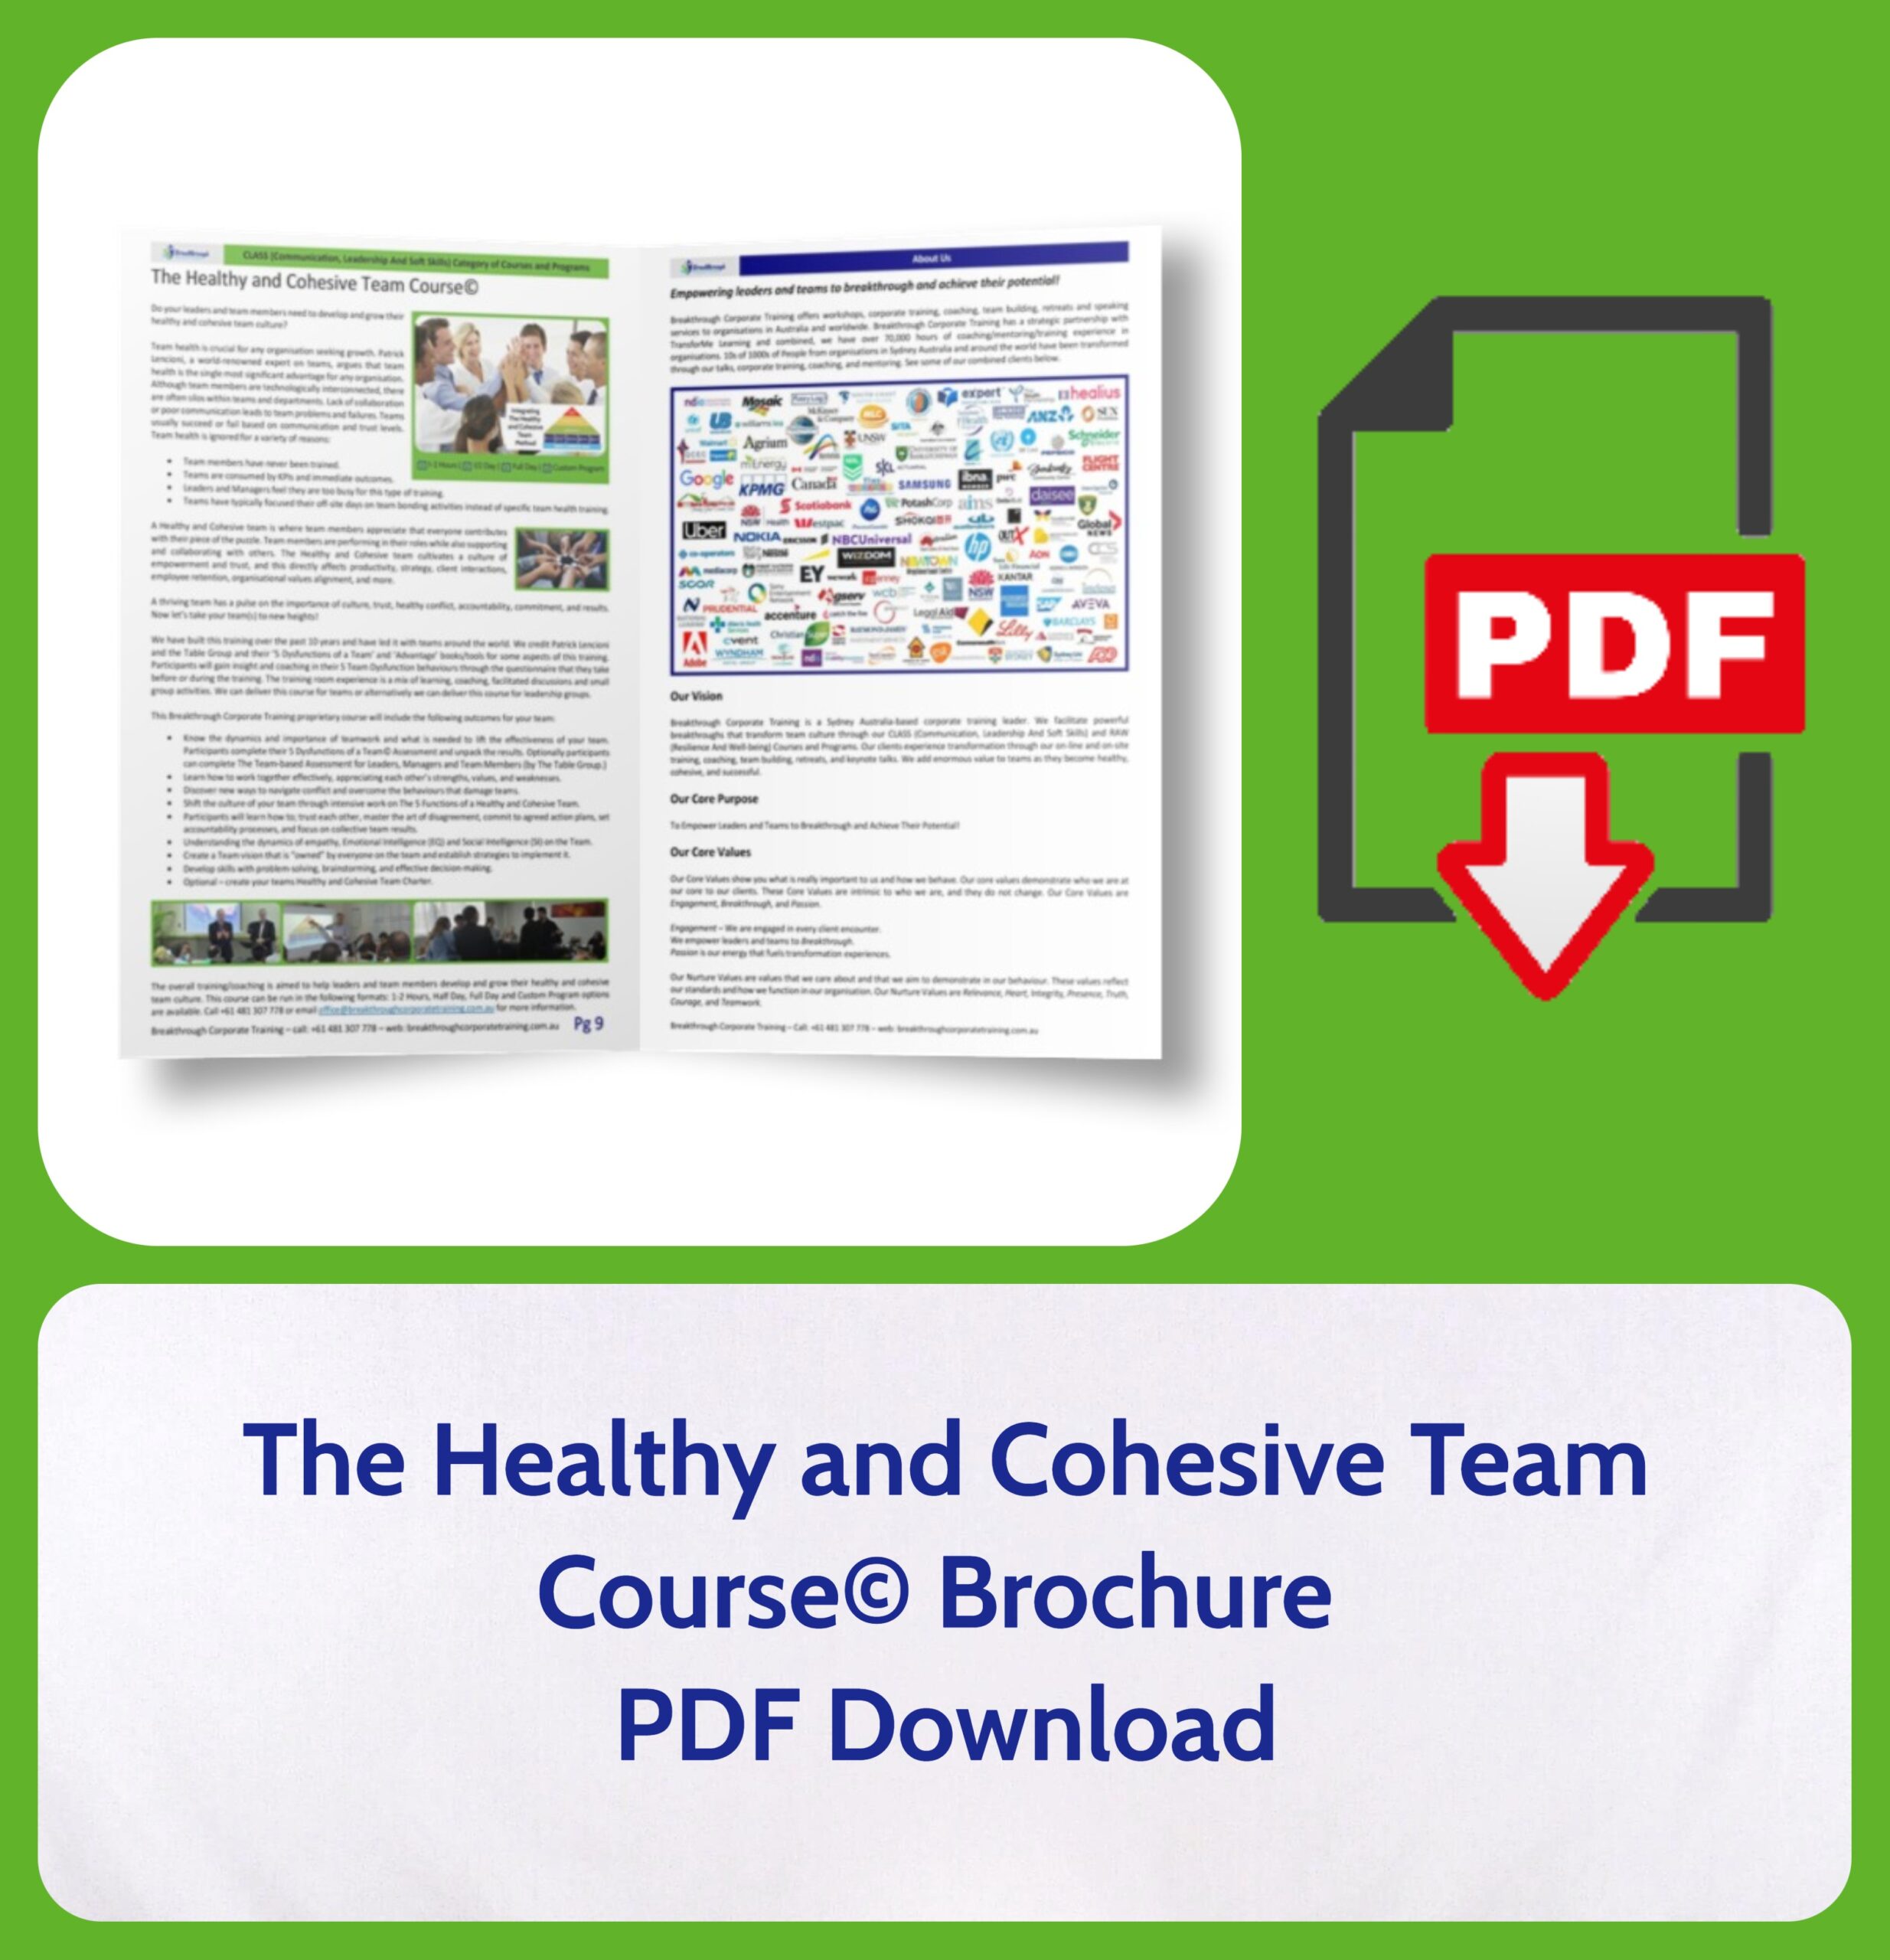 The Healthy and Cohesive Team Course